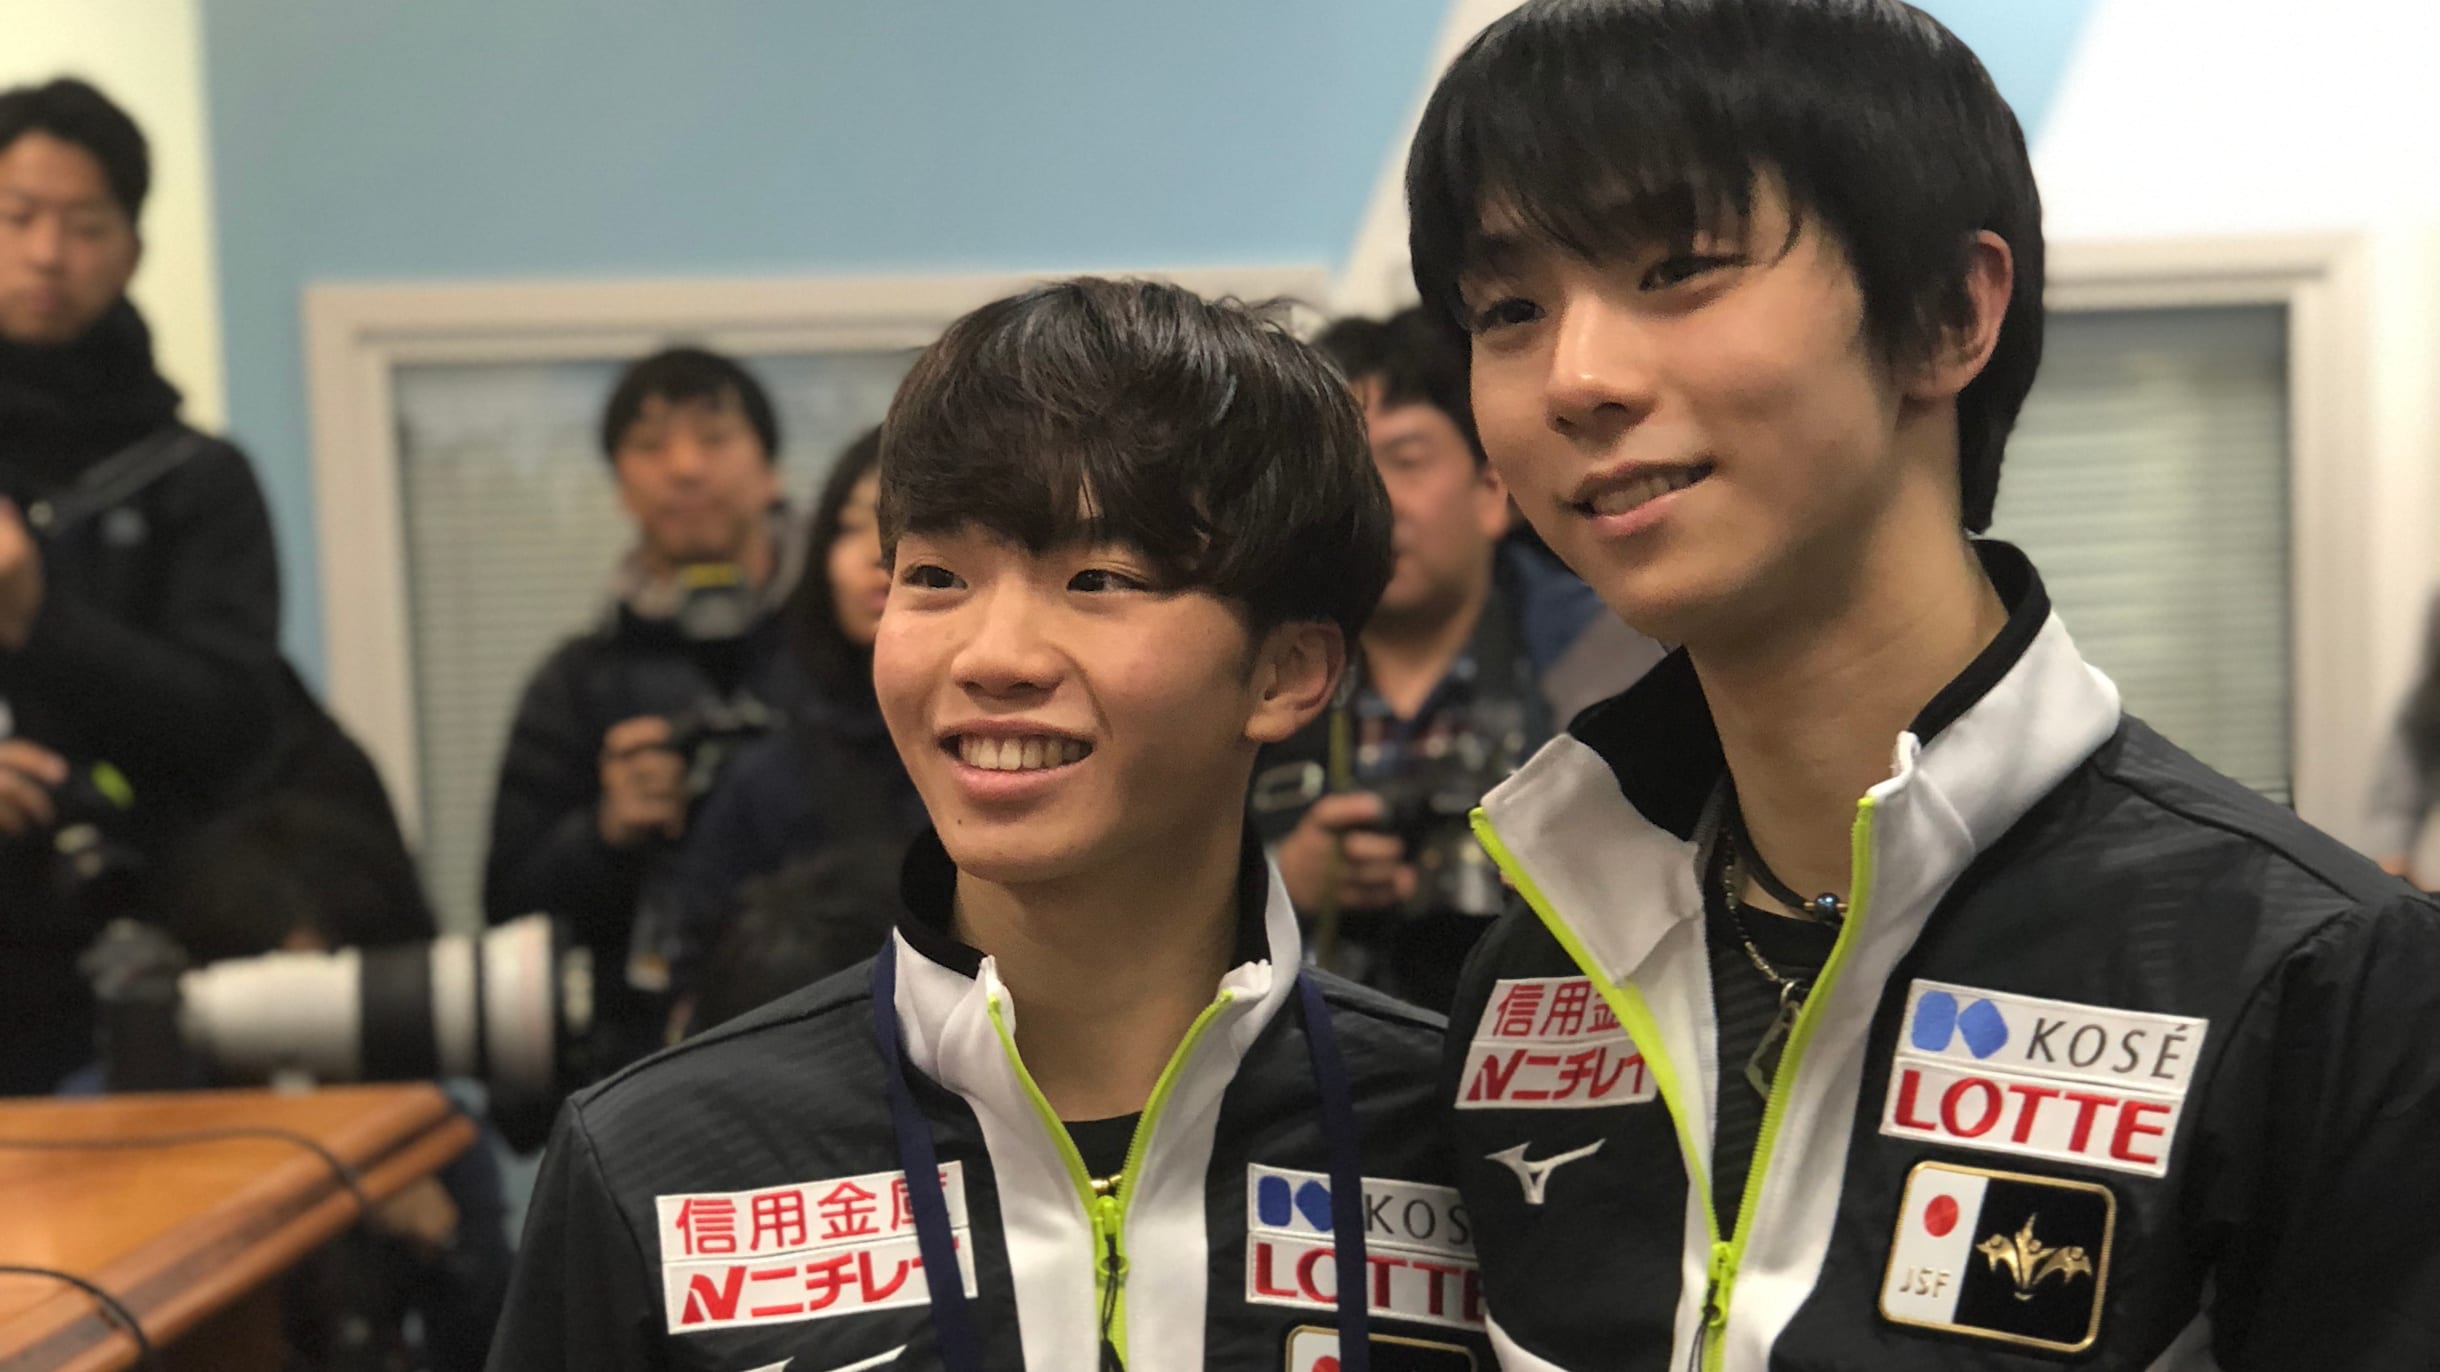 Moscow gripped by Yuzuru Hanyu fever ahead of 2018 Rostelecom Cup